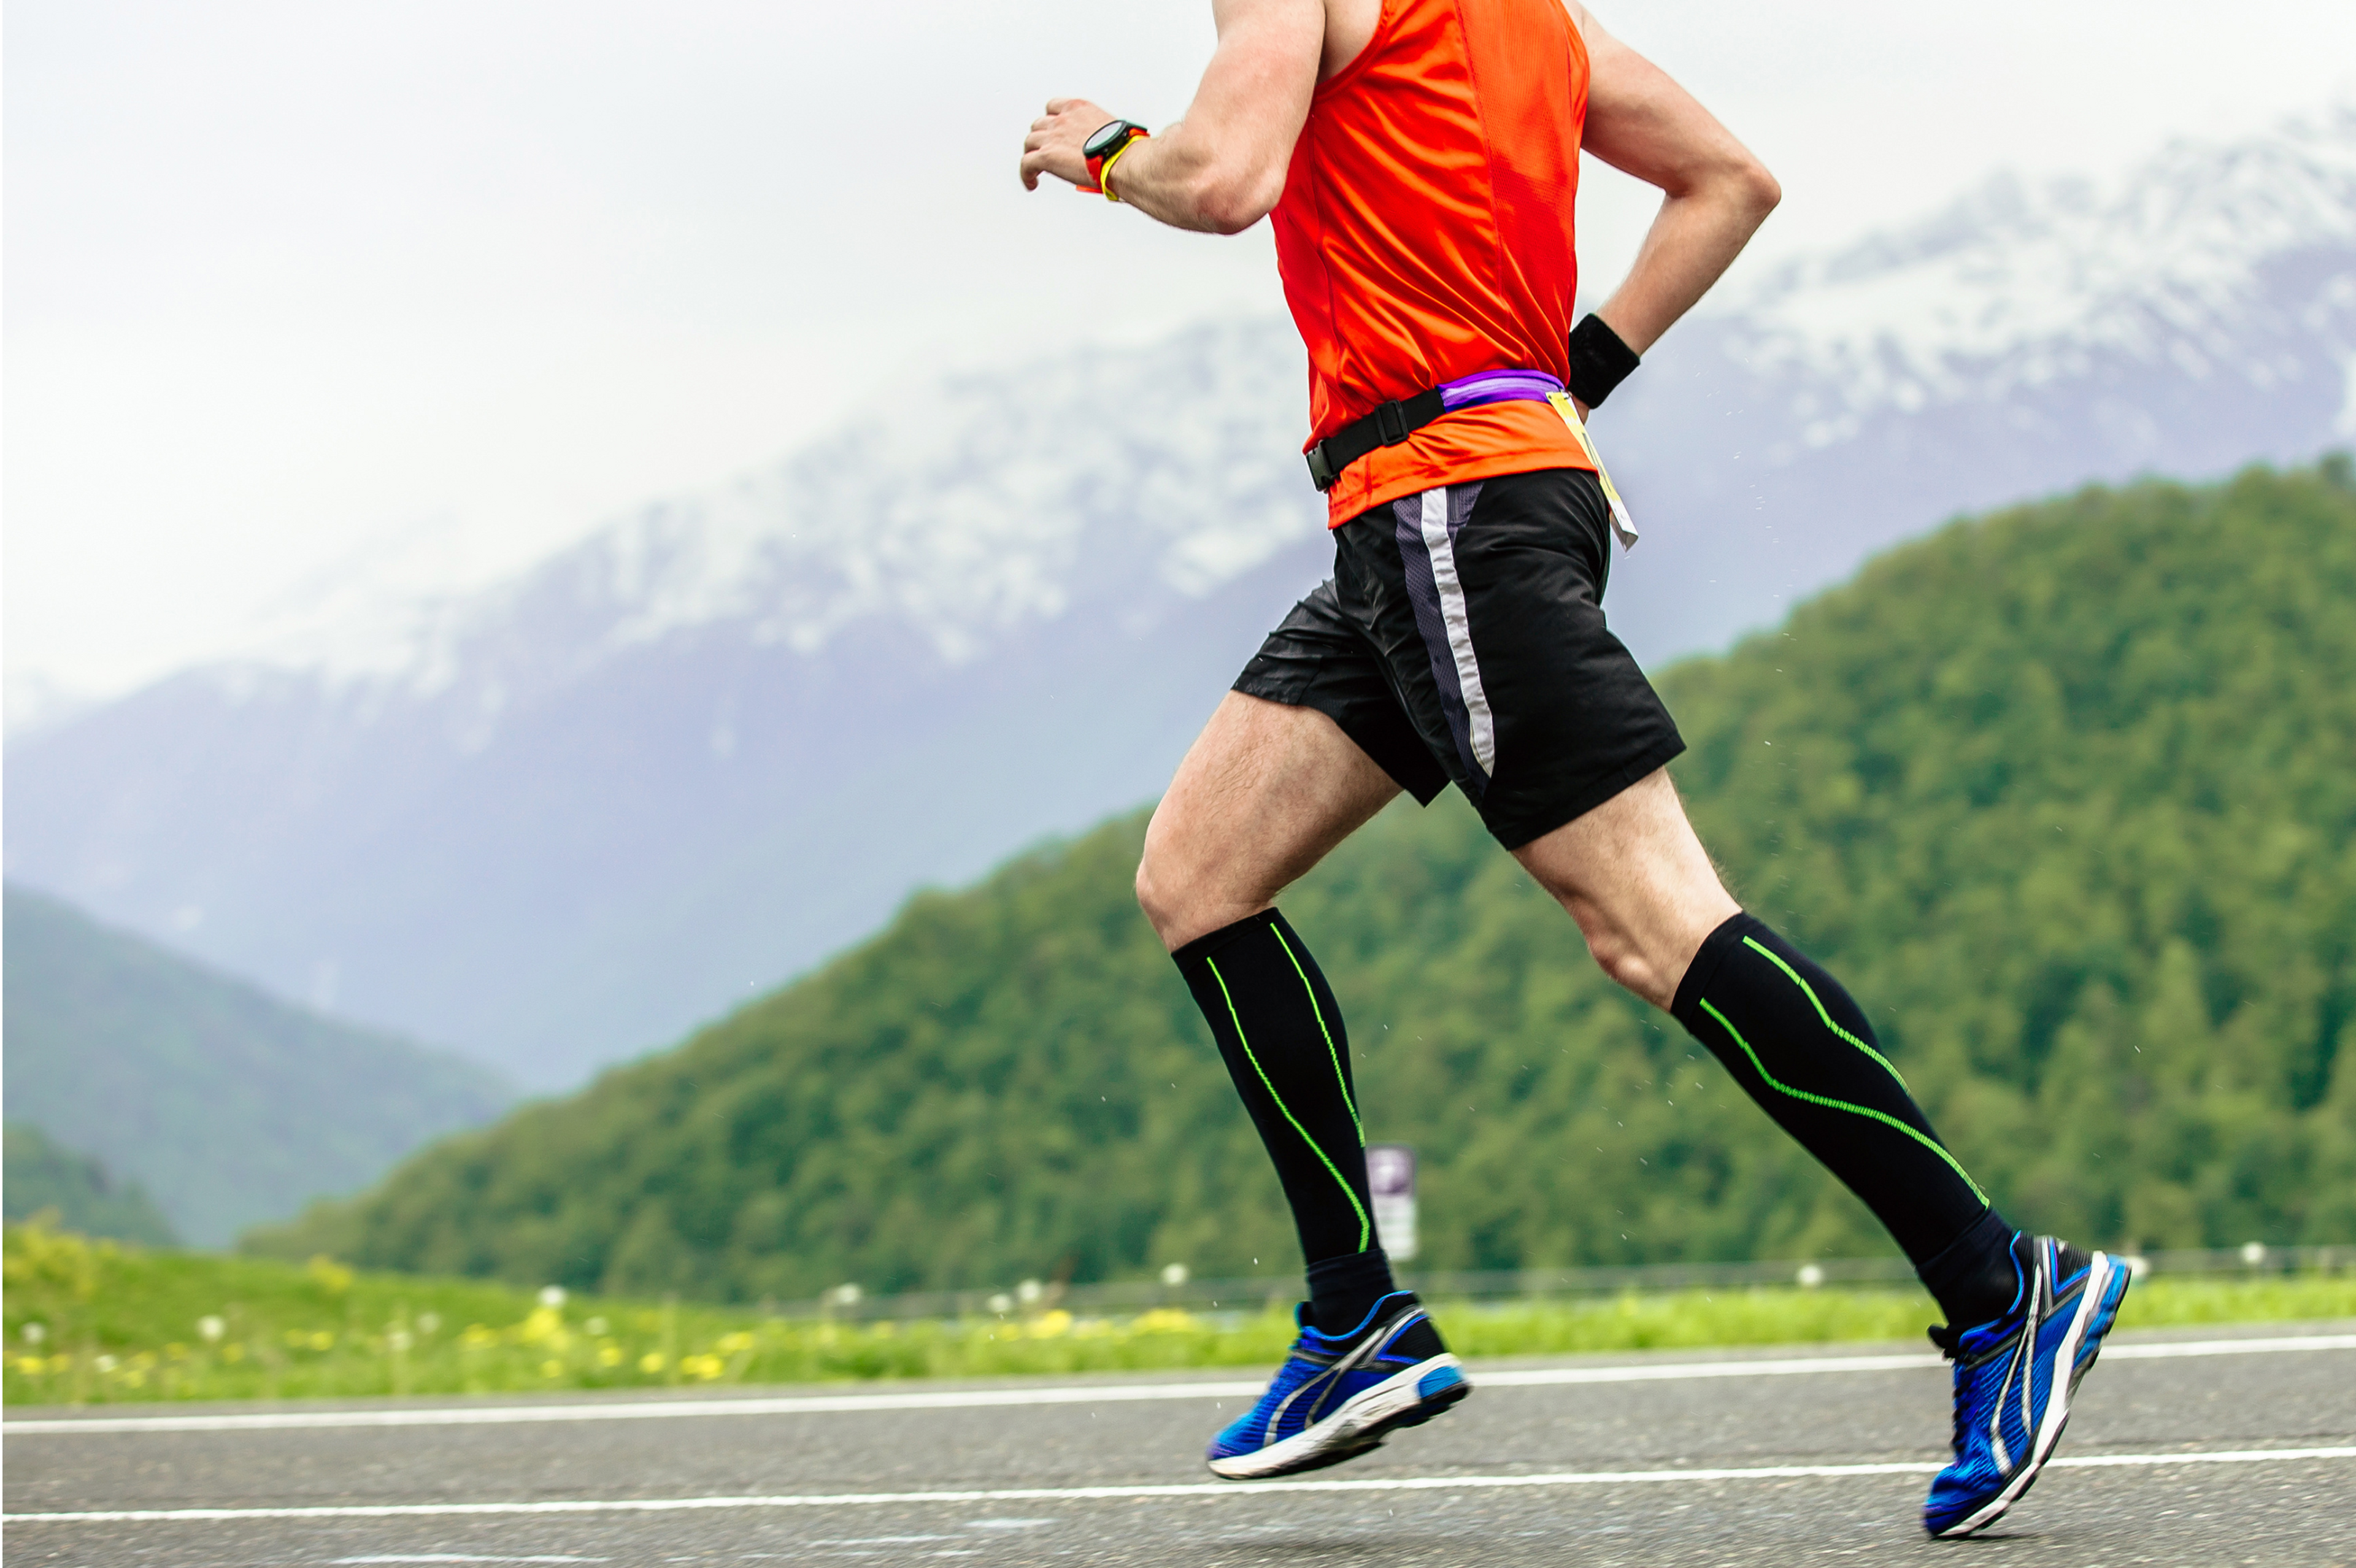 Compression sleeves and socks must feel comfortable and supportive. If they annoy you during your run, they likely aren't the right fit.